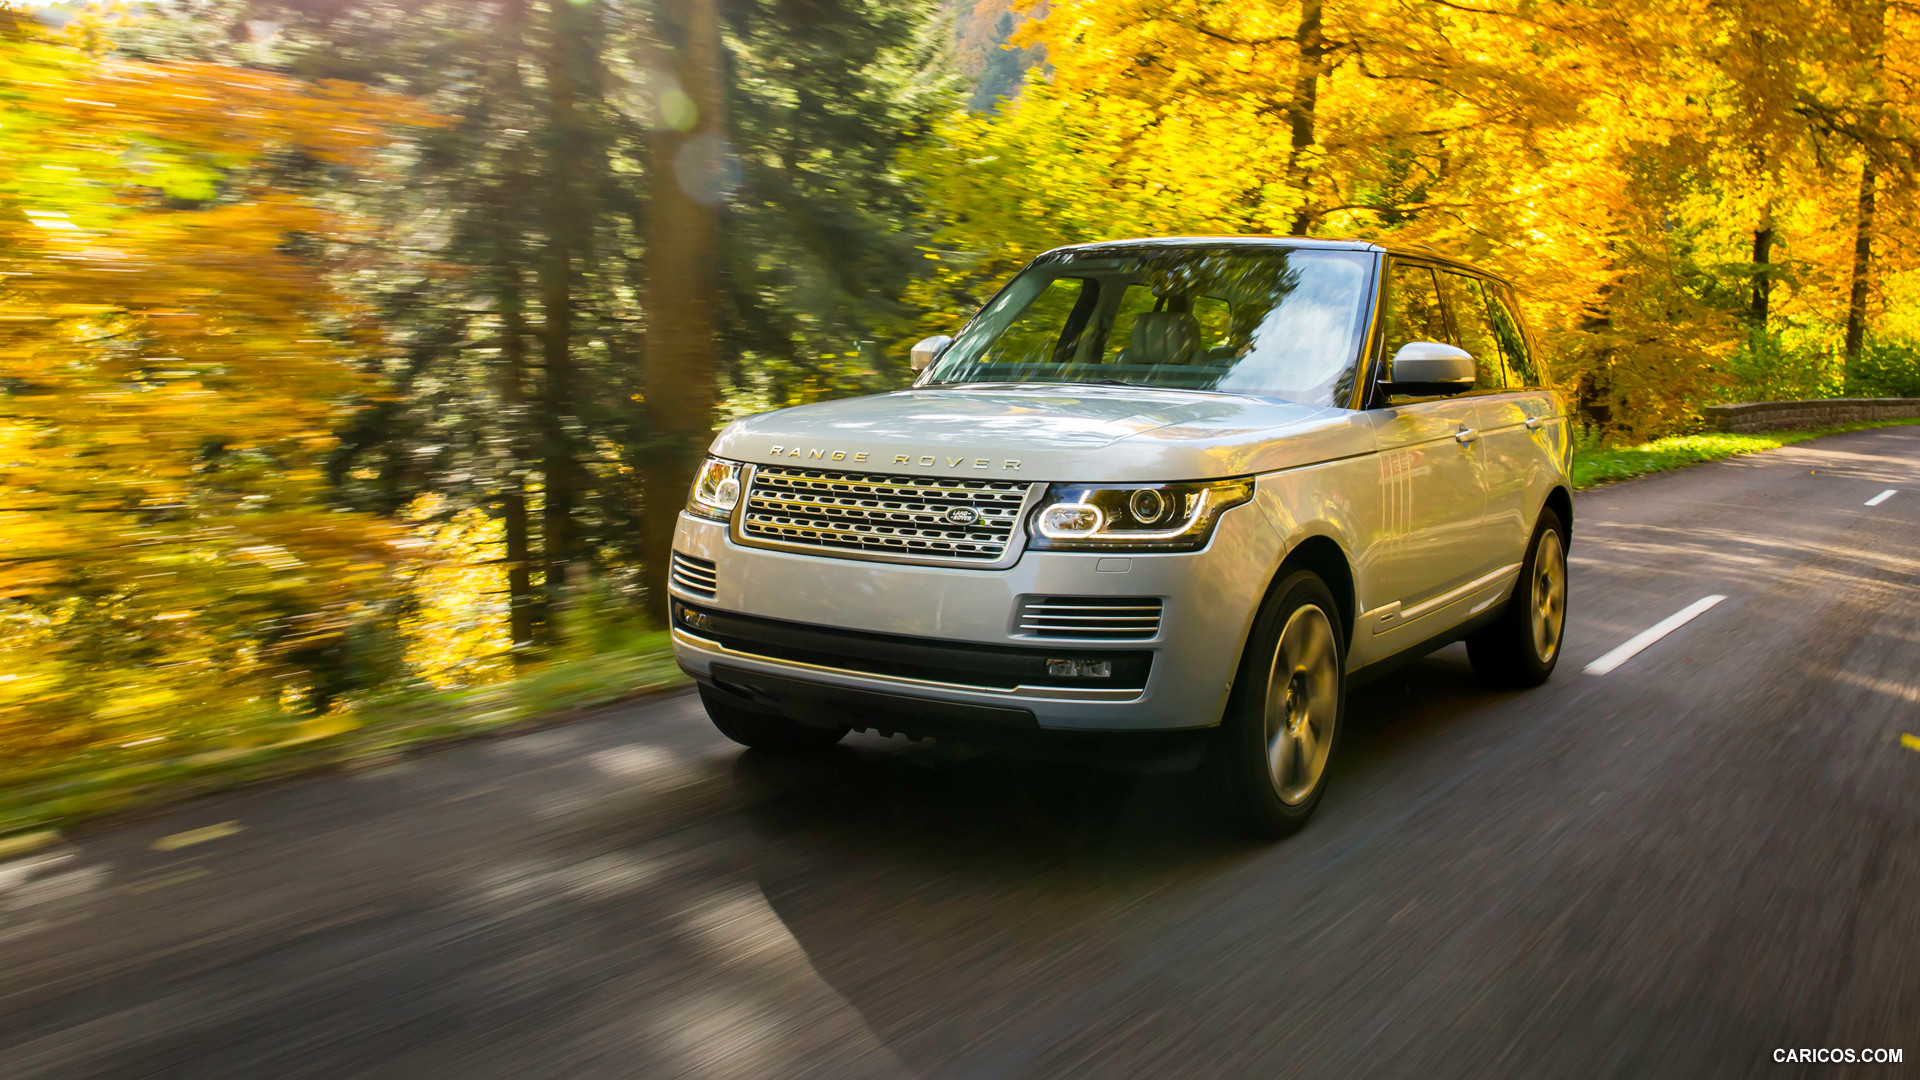 2015 Land Rover Range Rover Hybrid Pics, Vehicles Collection